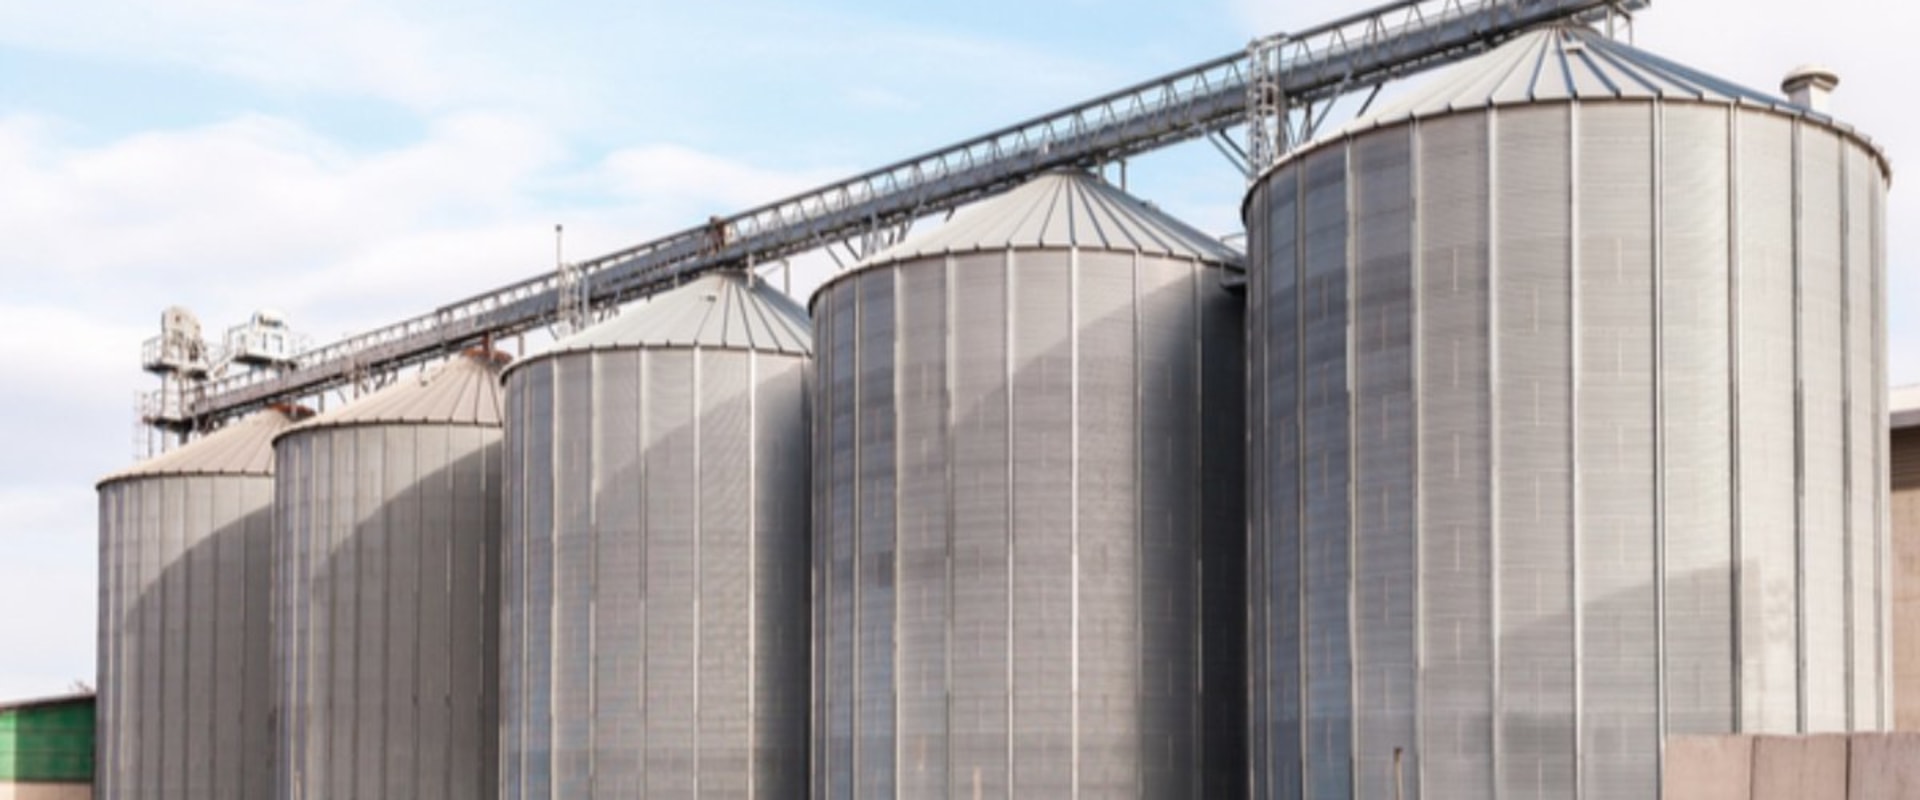 What is a silo in marketing?